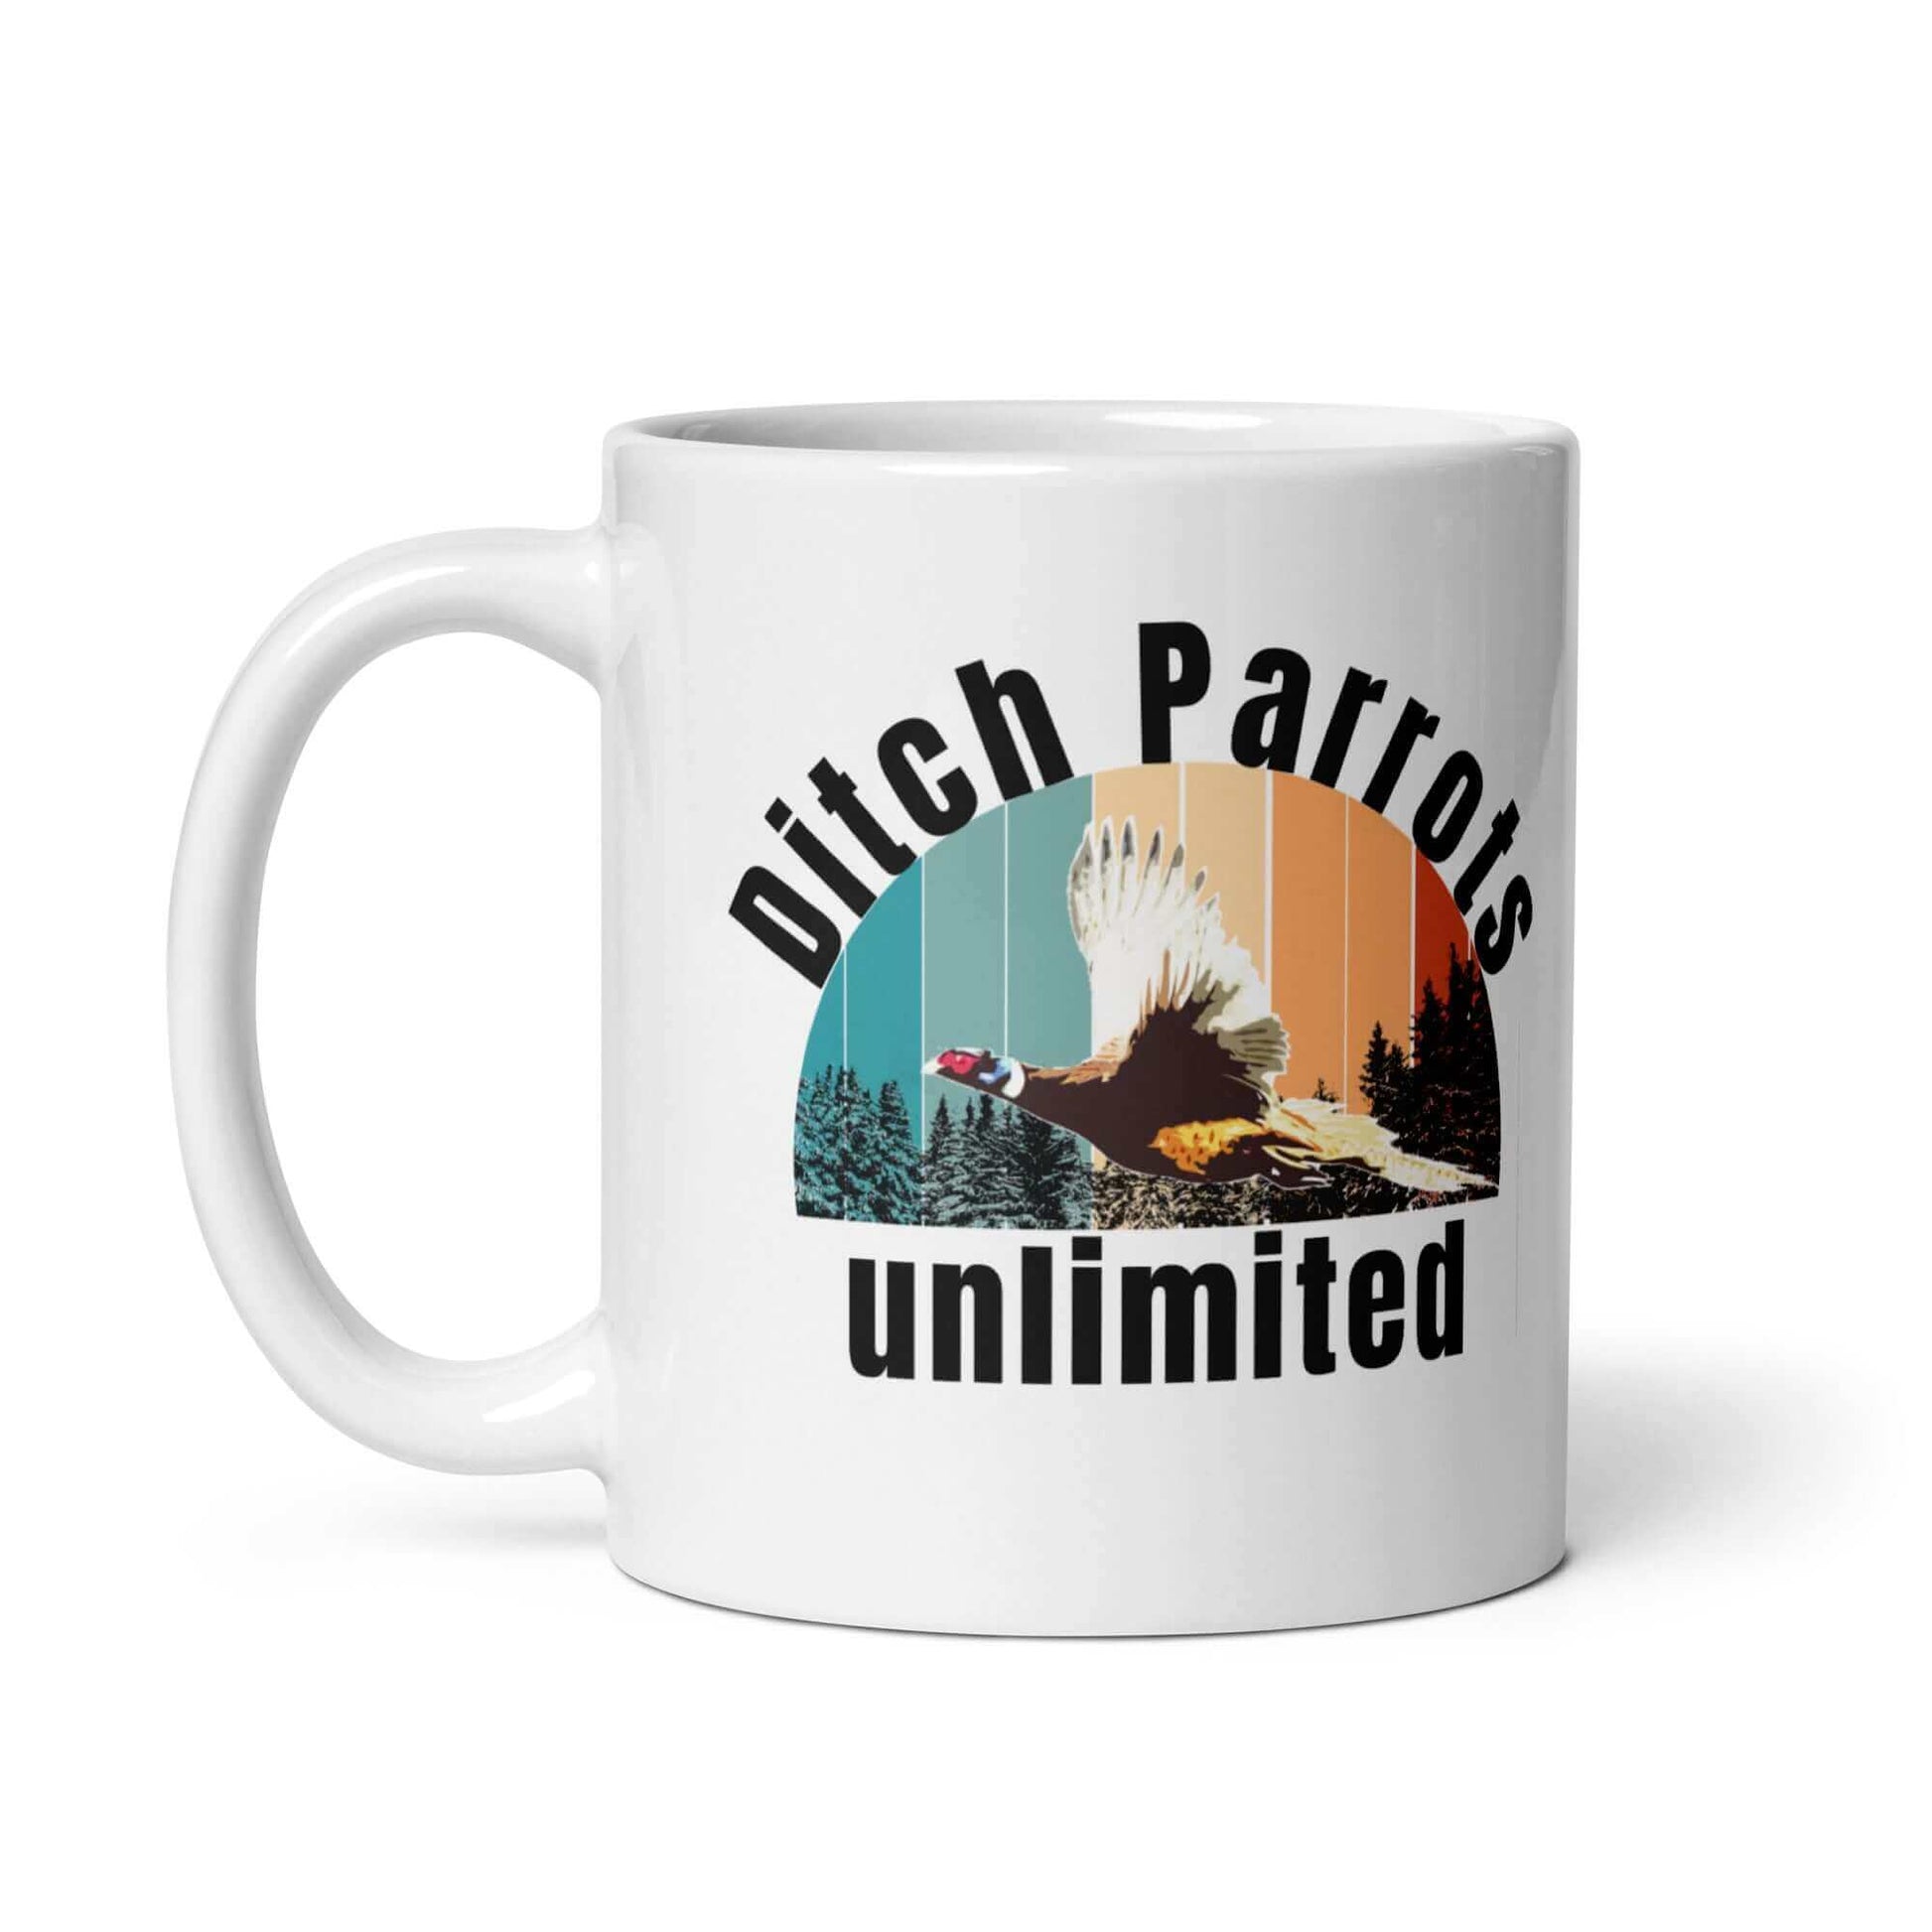 Ditch Parrots Unlimited - White glossy mug bird dog bird hunting ditch chicken ditch parrot hunting parrot pheasant